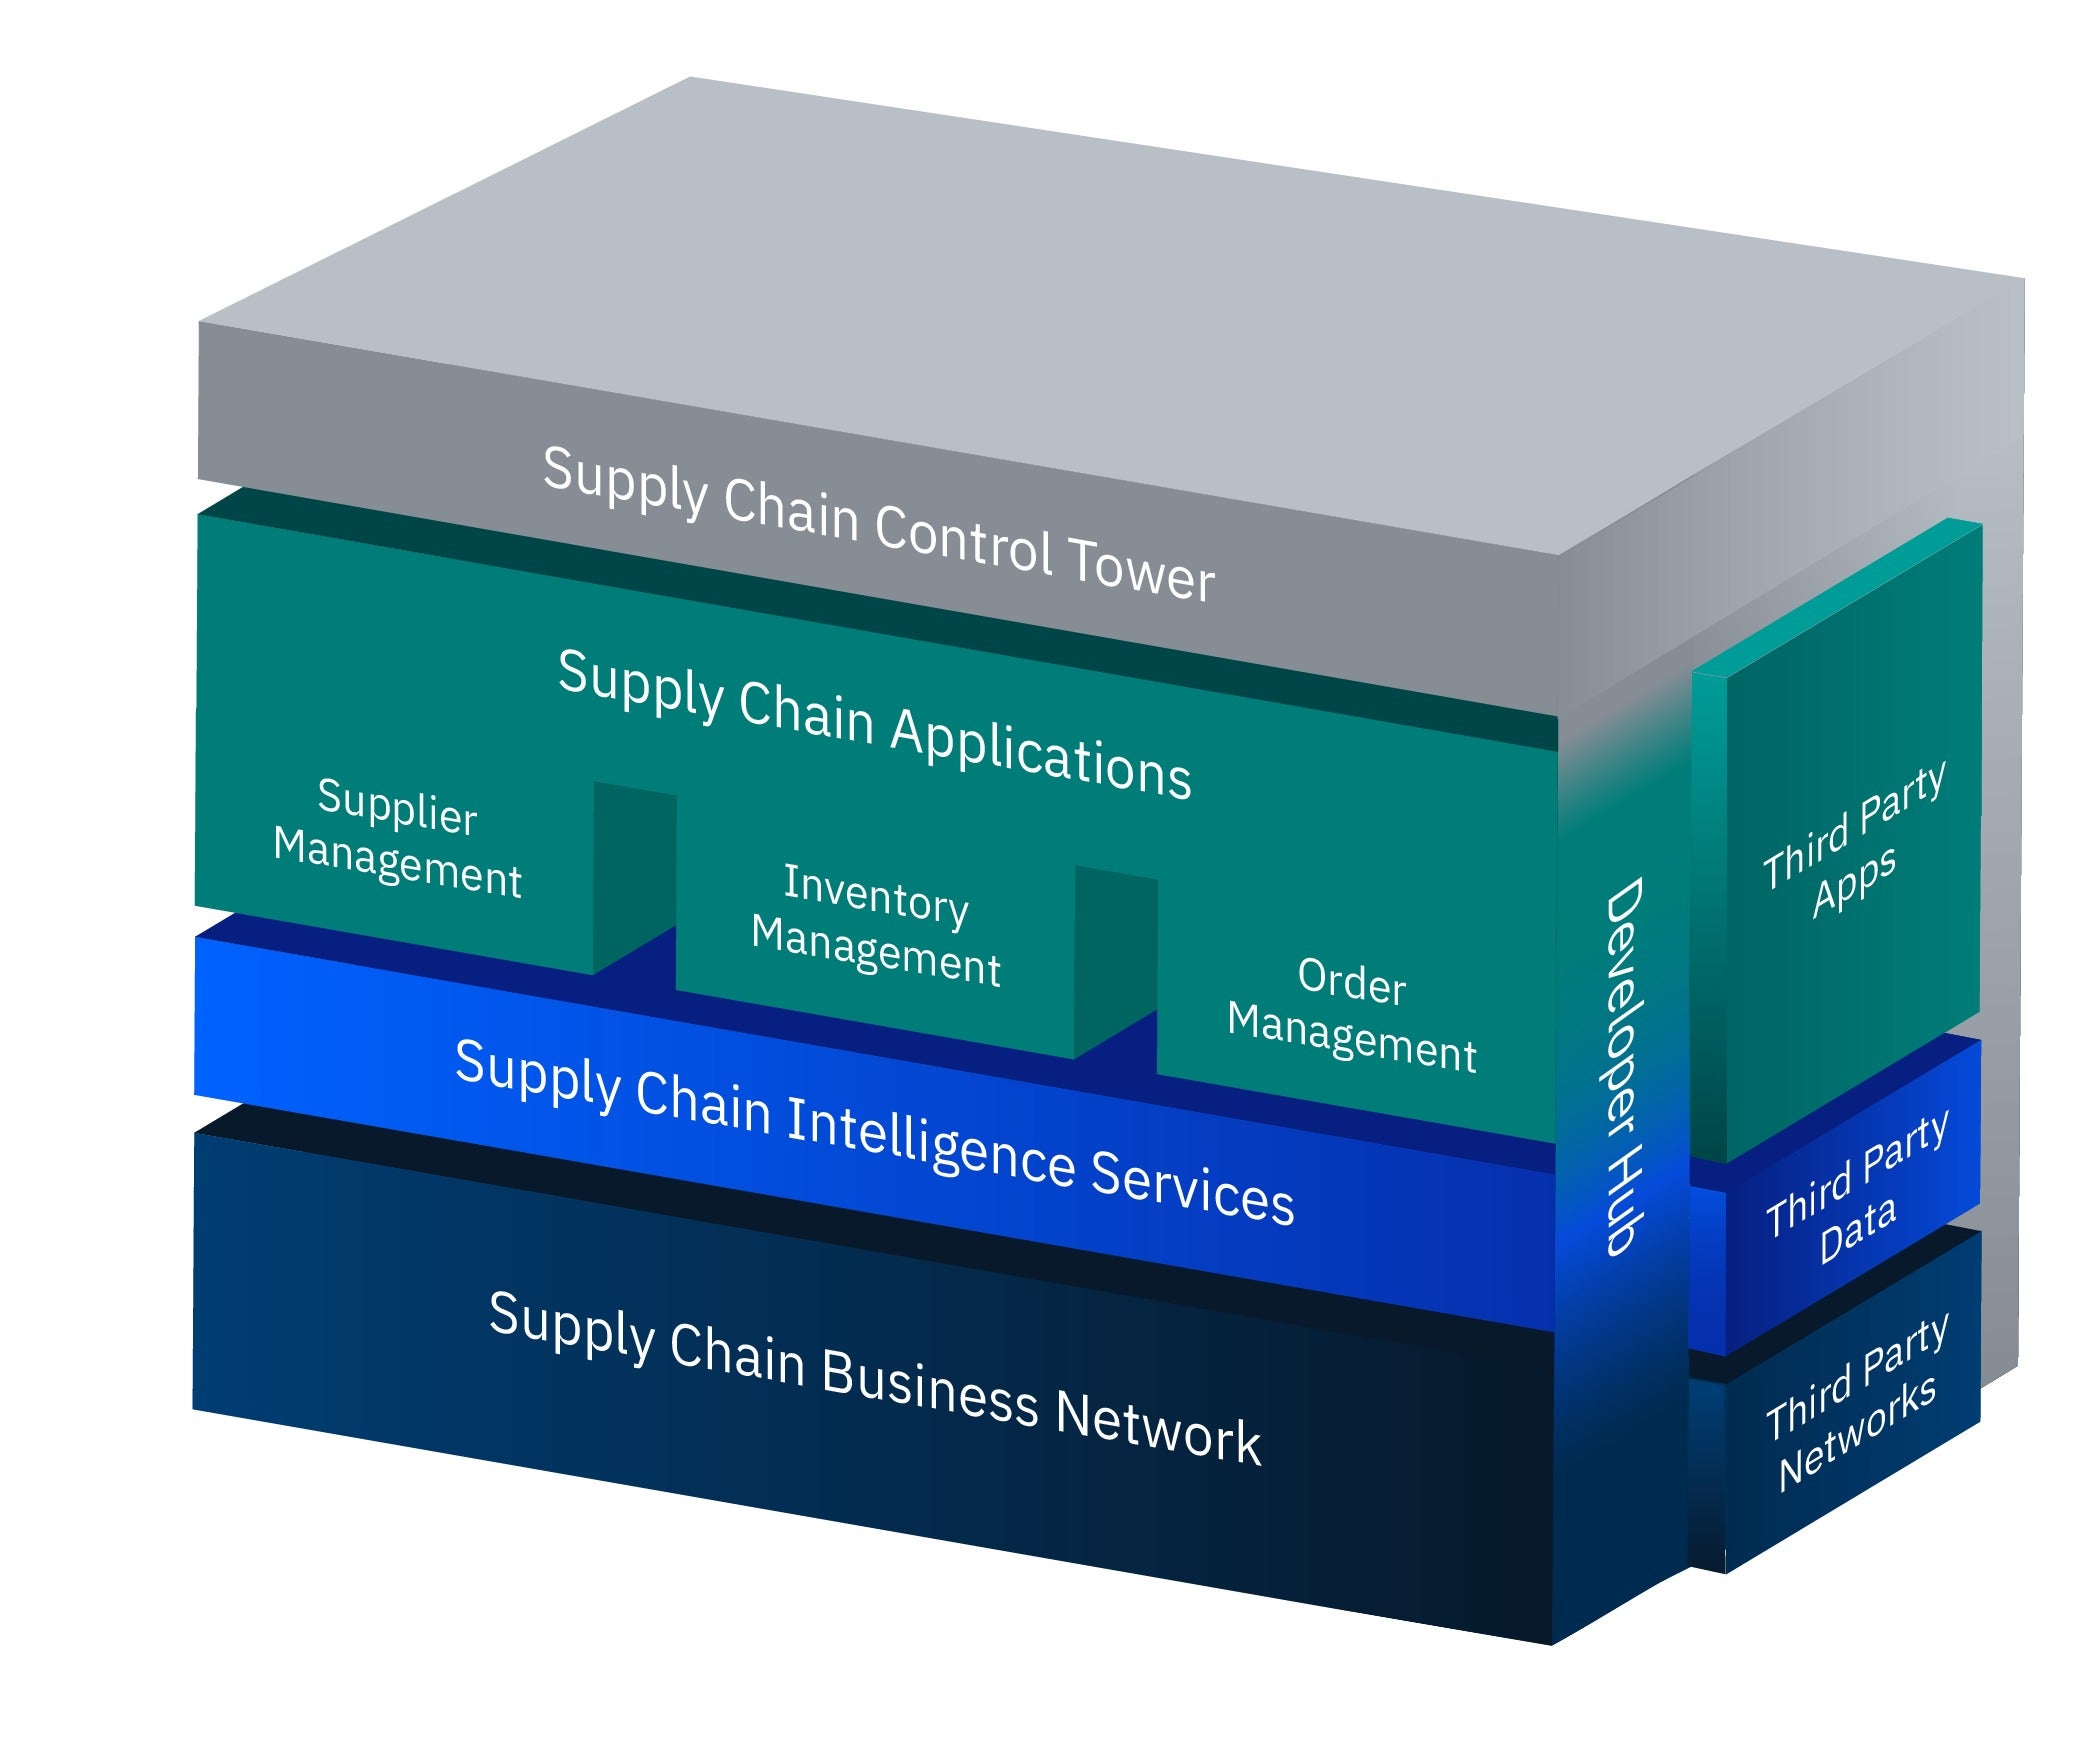 ibm-launches-blockchain-based-supply-chain-service-with-ai-iot-integration-alright-box